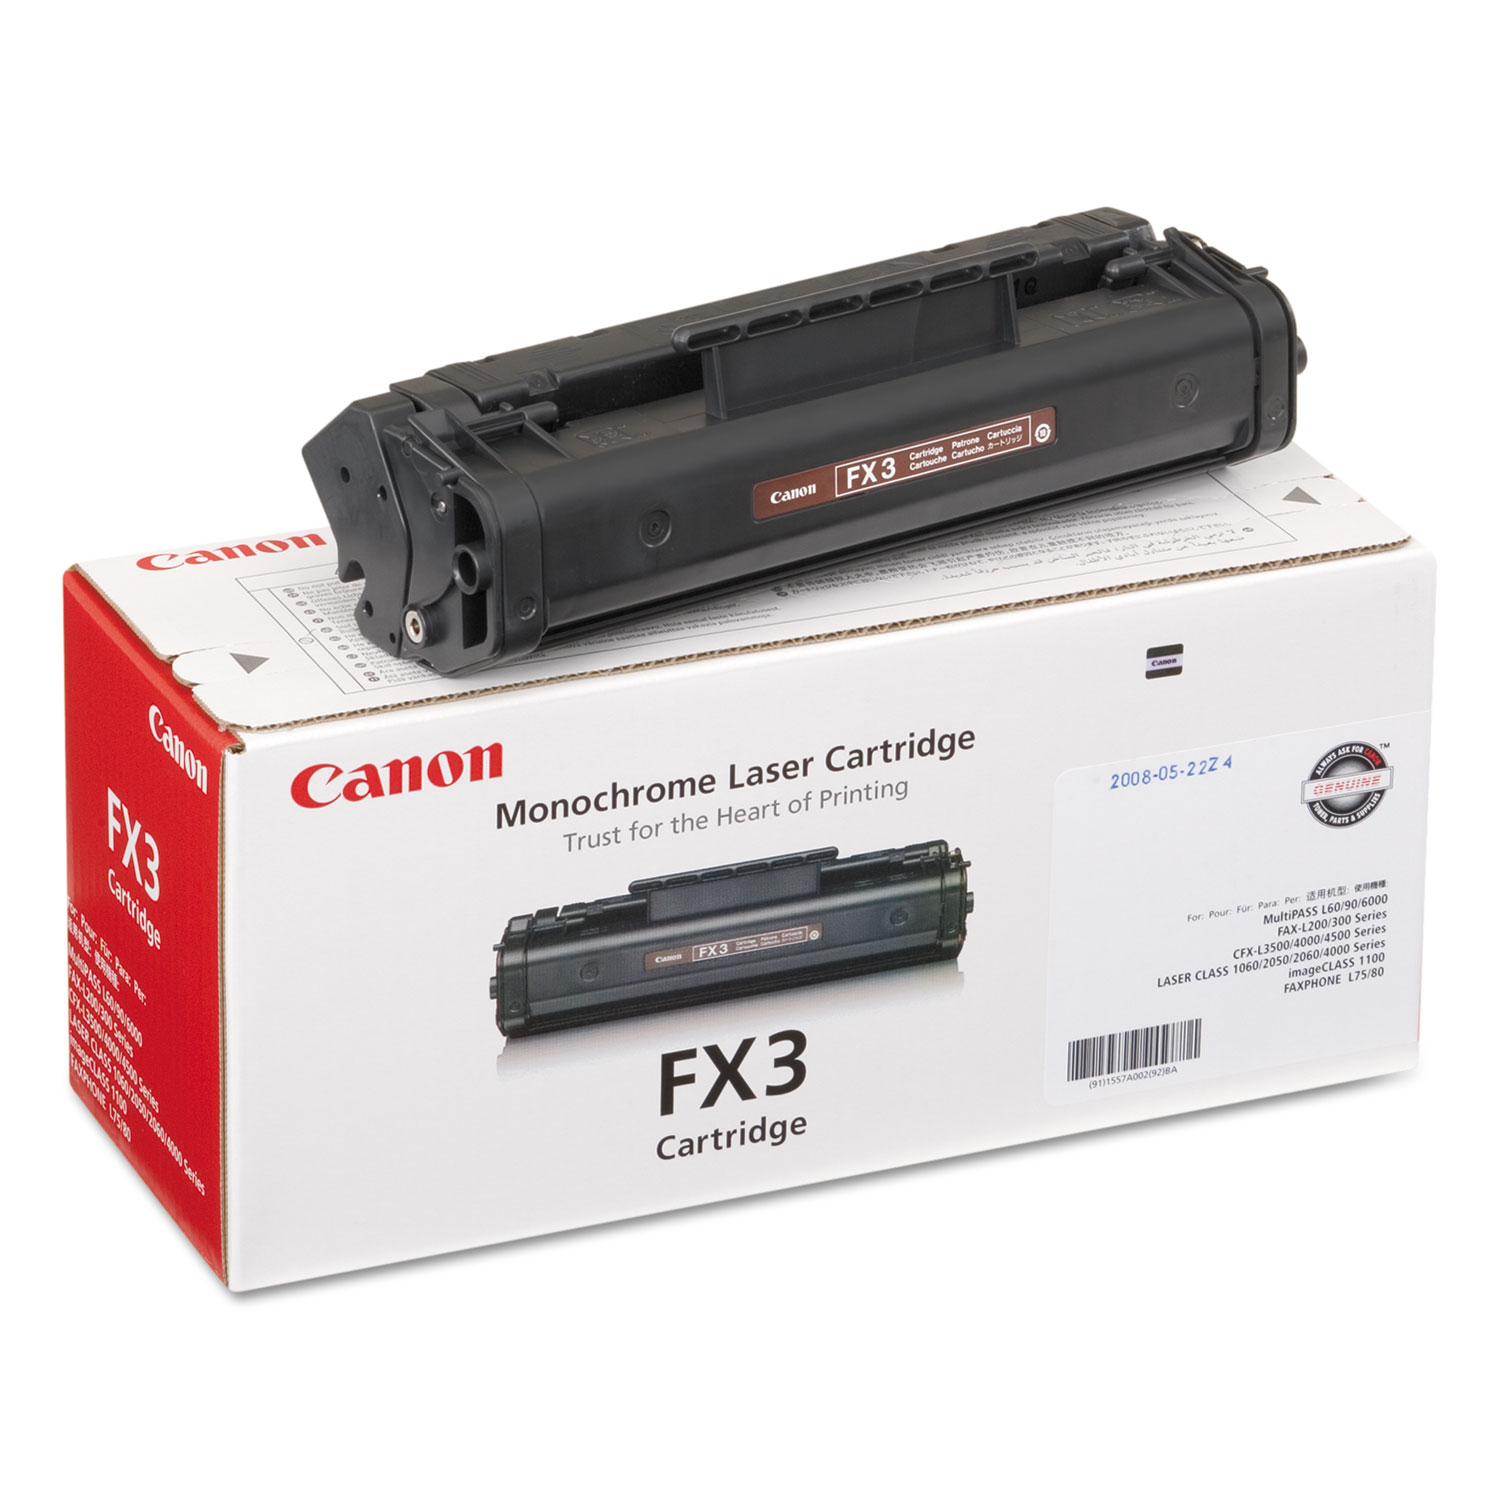  Canon 1557A002 FX3 (FX-3) Toner, 2700 Page-Yield, Black (CNMFX3) 